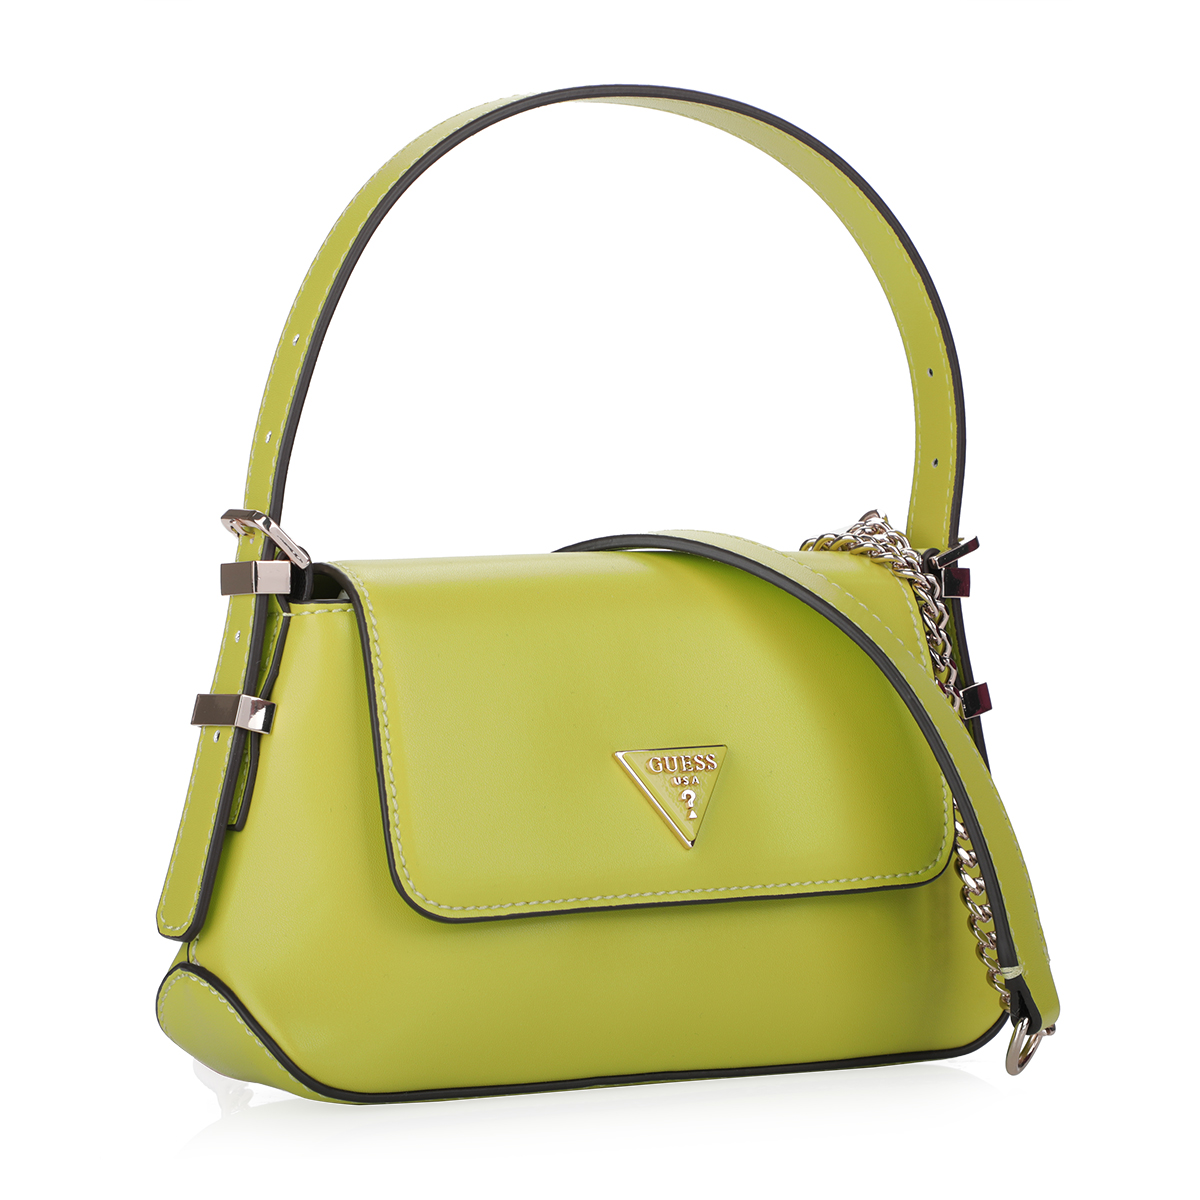  Desideria Mini Shoulder Bag : GUESS: Clothing, Shoes & Jewelry